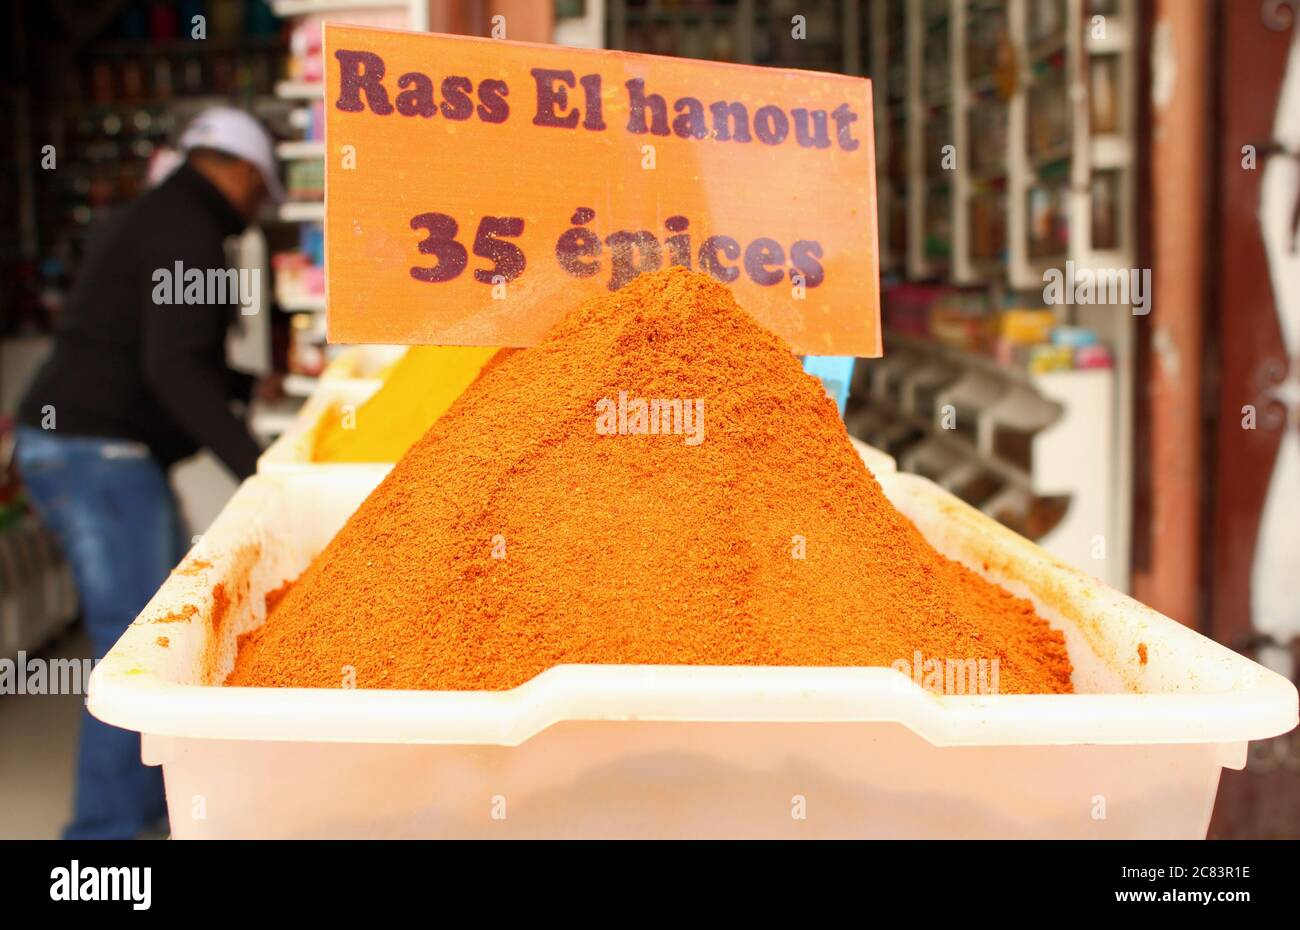 Rass El Hanout Moroccan spice mix for sale in a street market in Morocco. Stock Photo